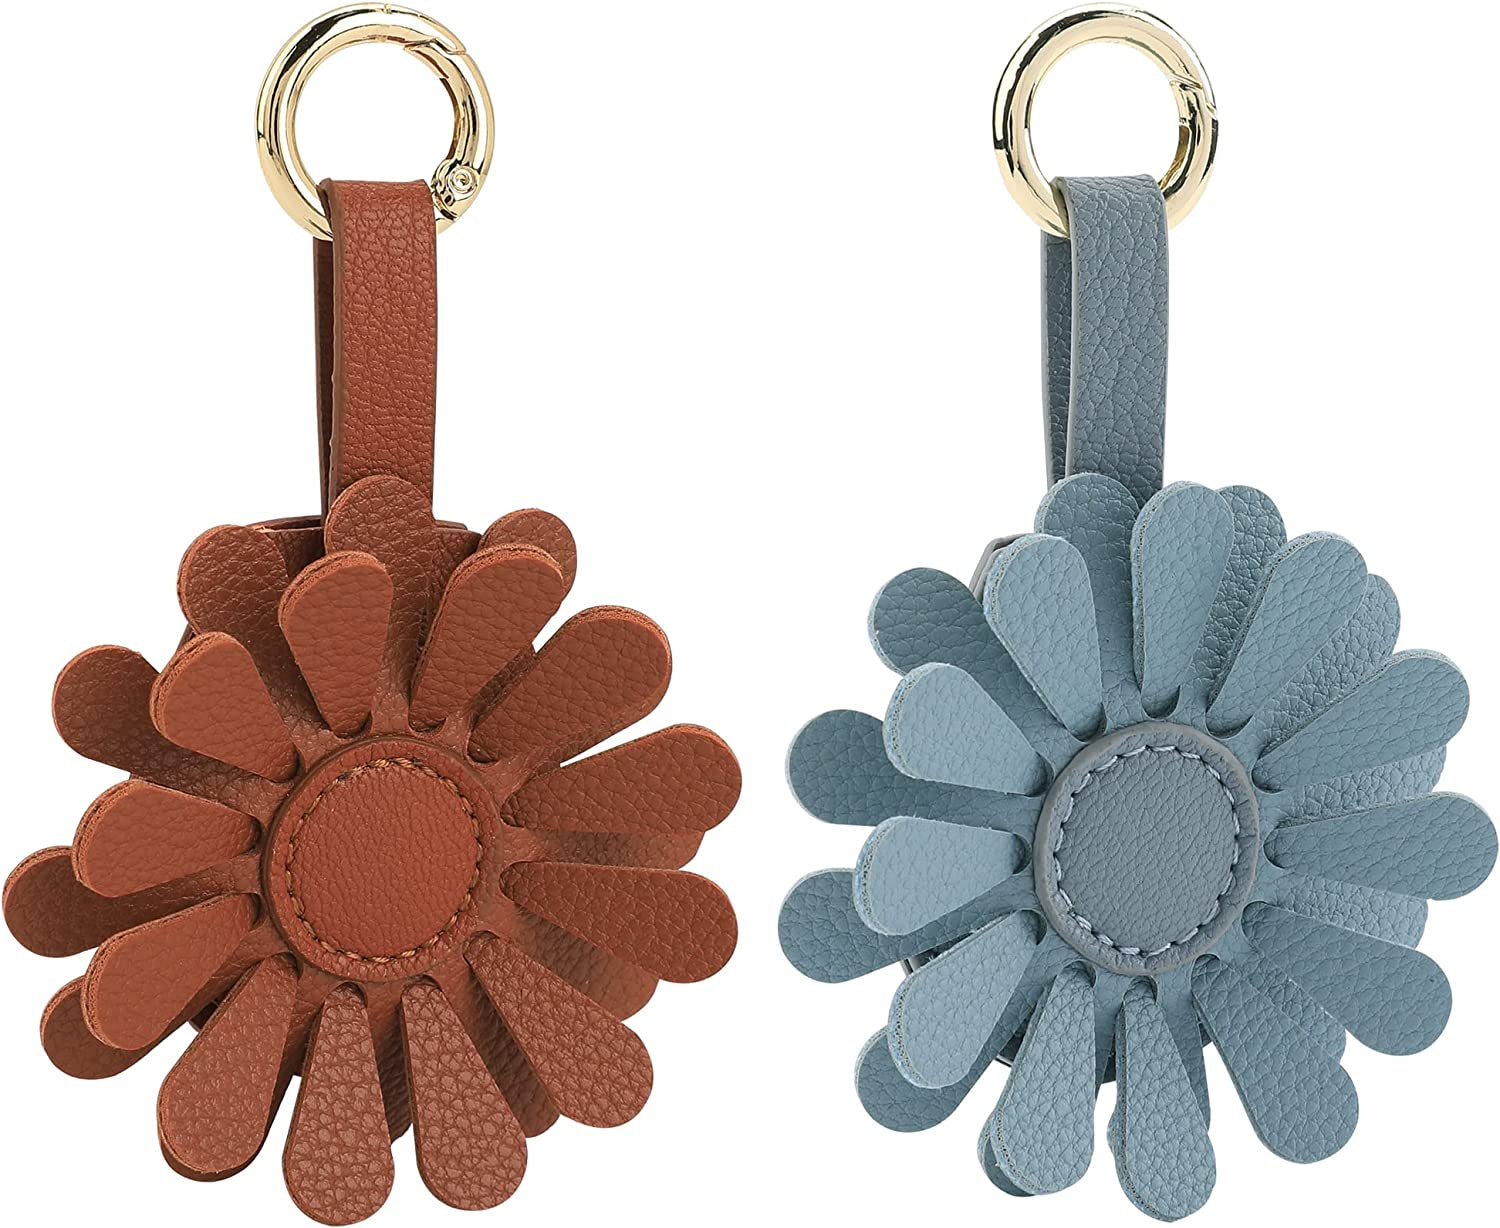 URIZZD Air Tag Keychain for Apple Airtags Holder, 2 Pack Flower Air Tag Cases, Leather Cover for Airtags Holder for Purse/Wallet/Pets/Kids/Travel (6Fbaat02-Blue)